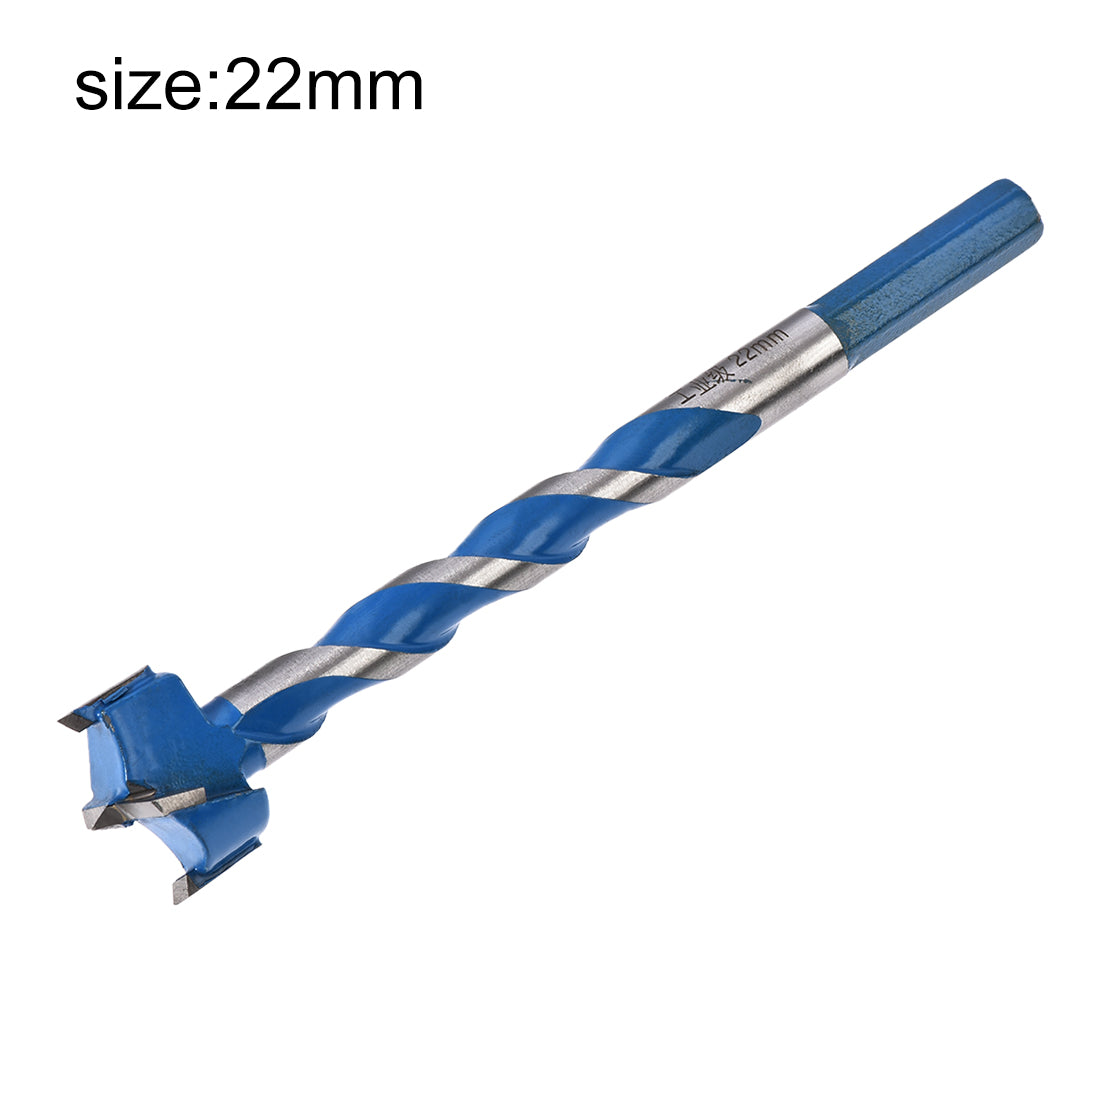 uxcell Uxcell Forstner Wood Boring Drill Bit 22mm Dia. Hole Saw Carbide Alloy Steel Tip Hex Shank Cutting for Hinge Plywood Wood Tool Blue